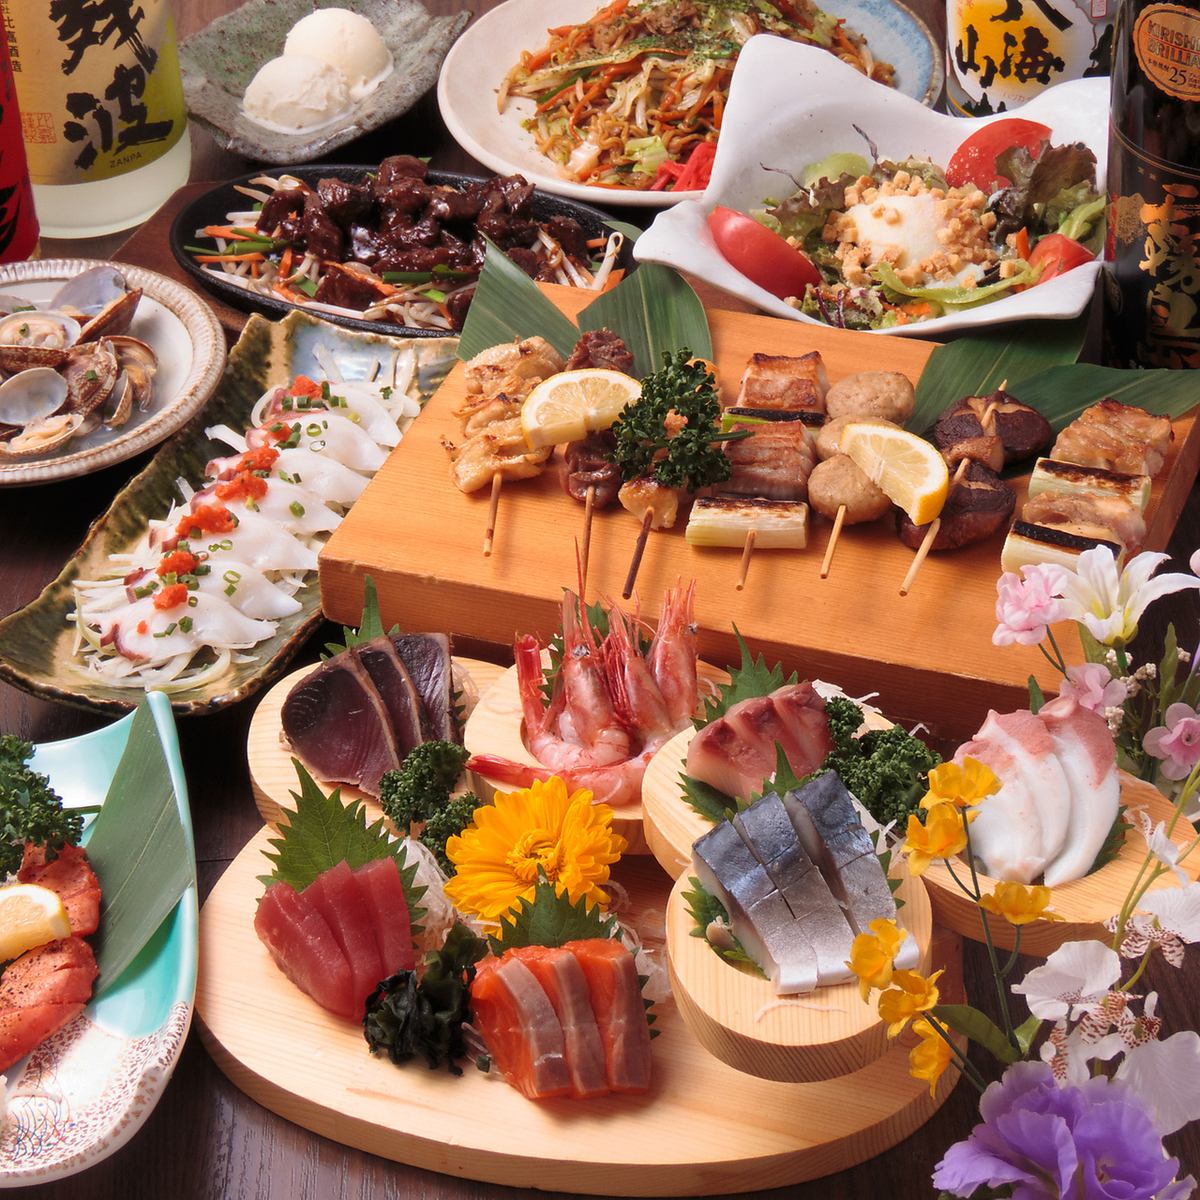 2 hours [all-you-can-eat & all-you-can-drink] 3,680 yen ⇒ 3,300 yen (excluding tax)